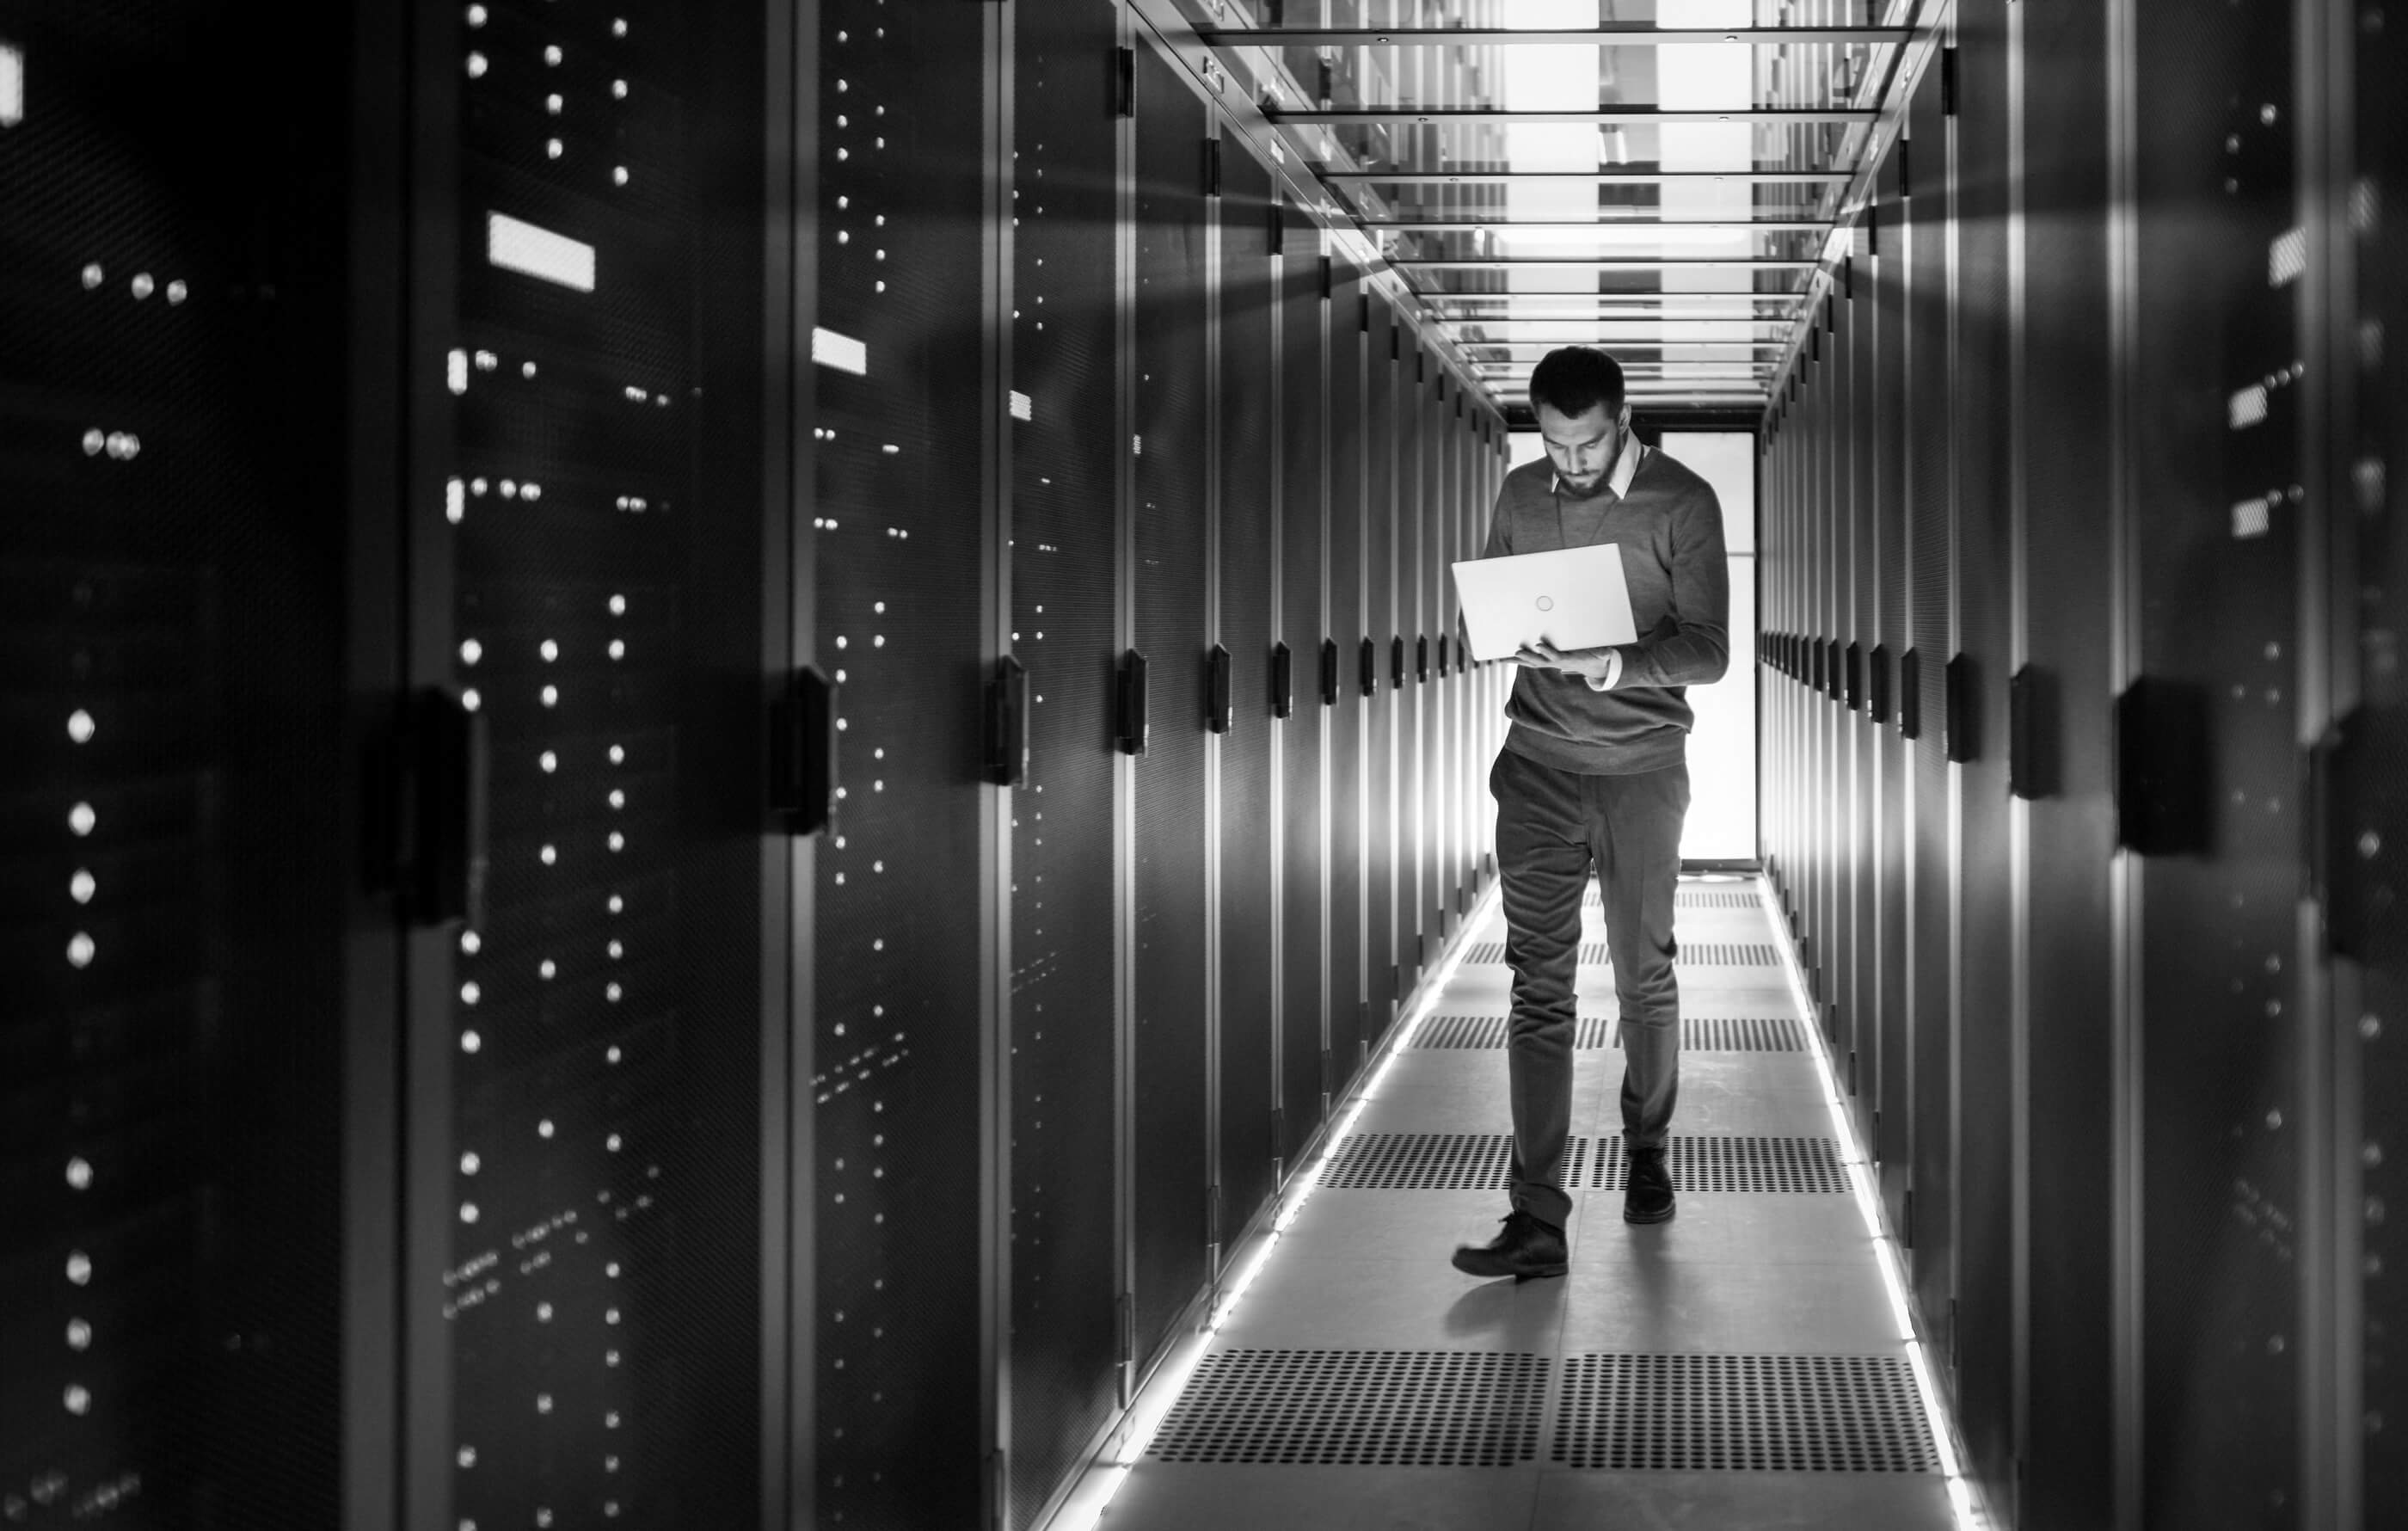 Full screen black and white image of a man walking along a server corridor, holding a laptop and looking at the screen